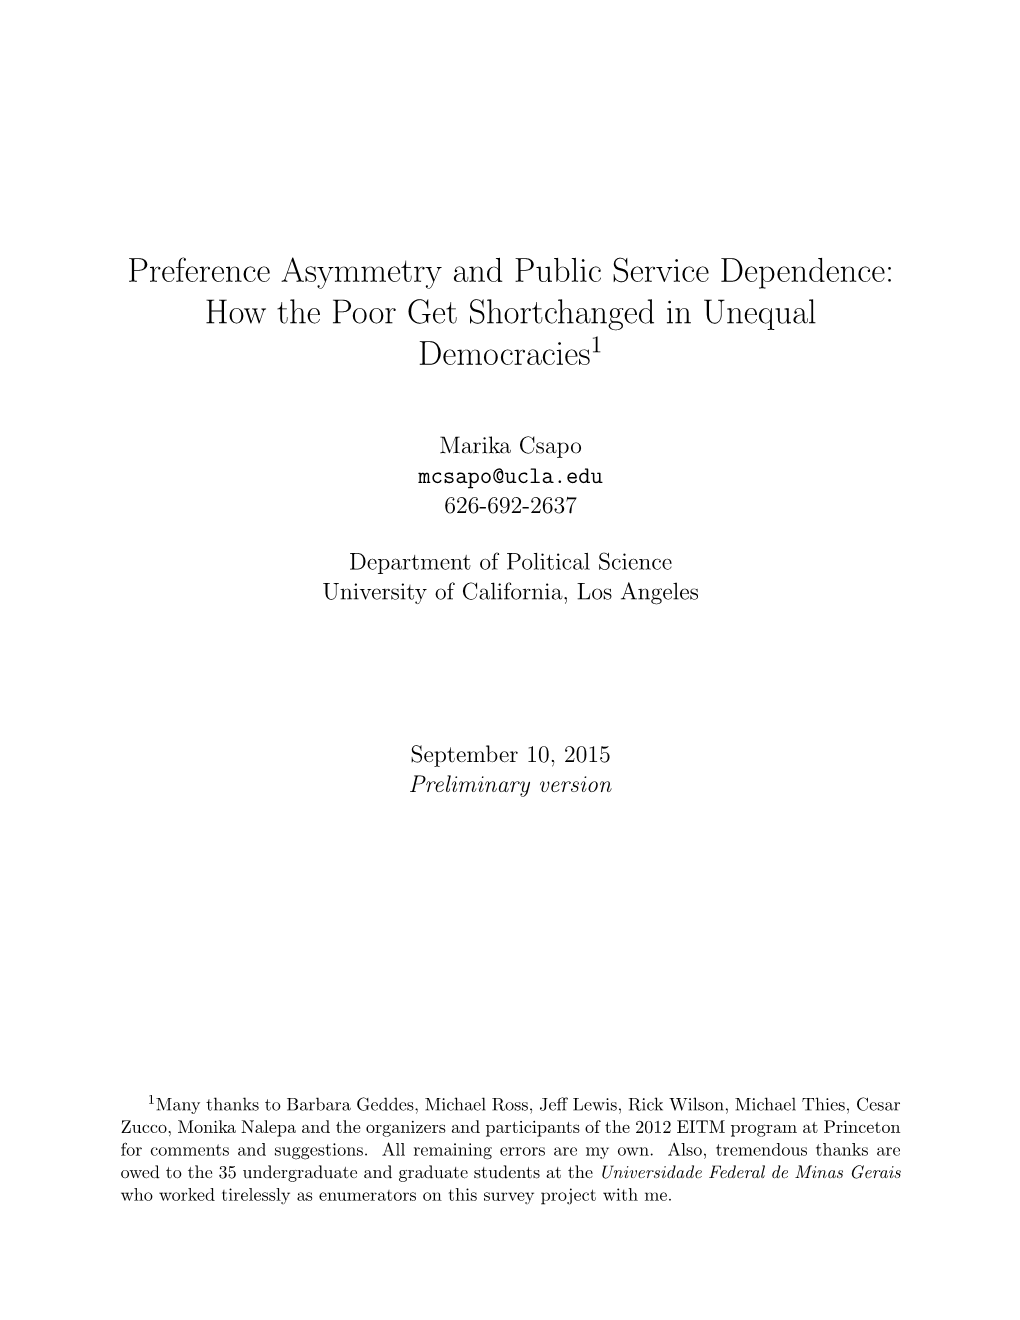 Preference Asymmetry and Public Service Dependence: How the Poor Get Shortchanged in Unequal Democracies1